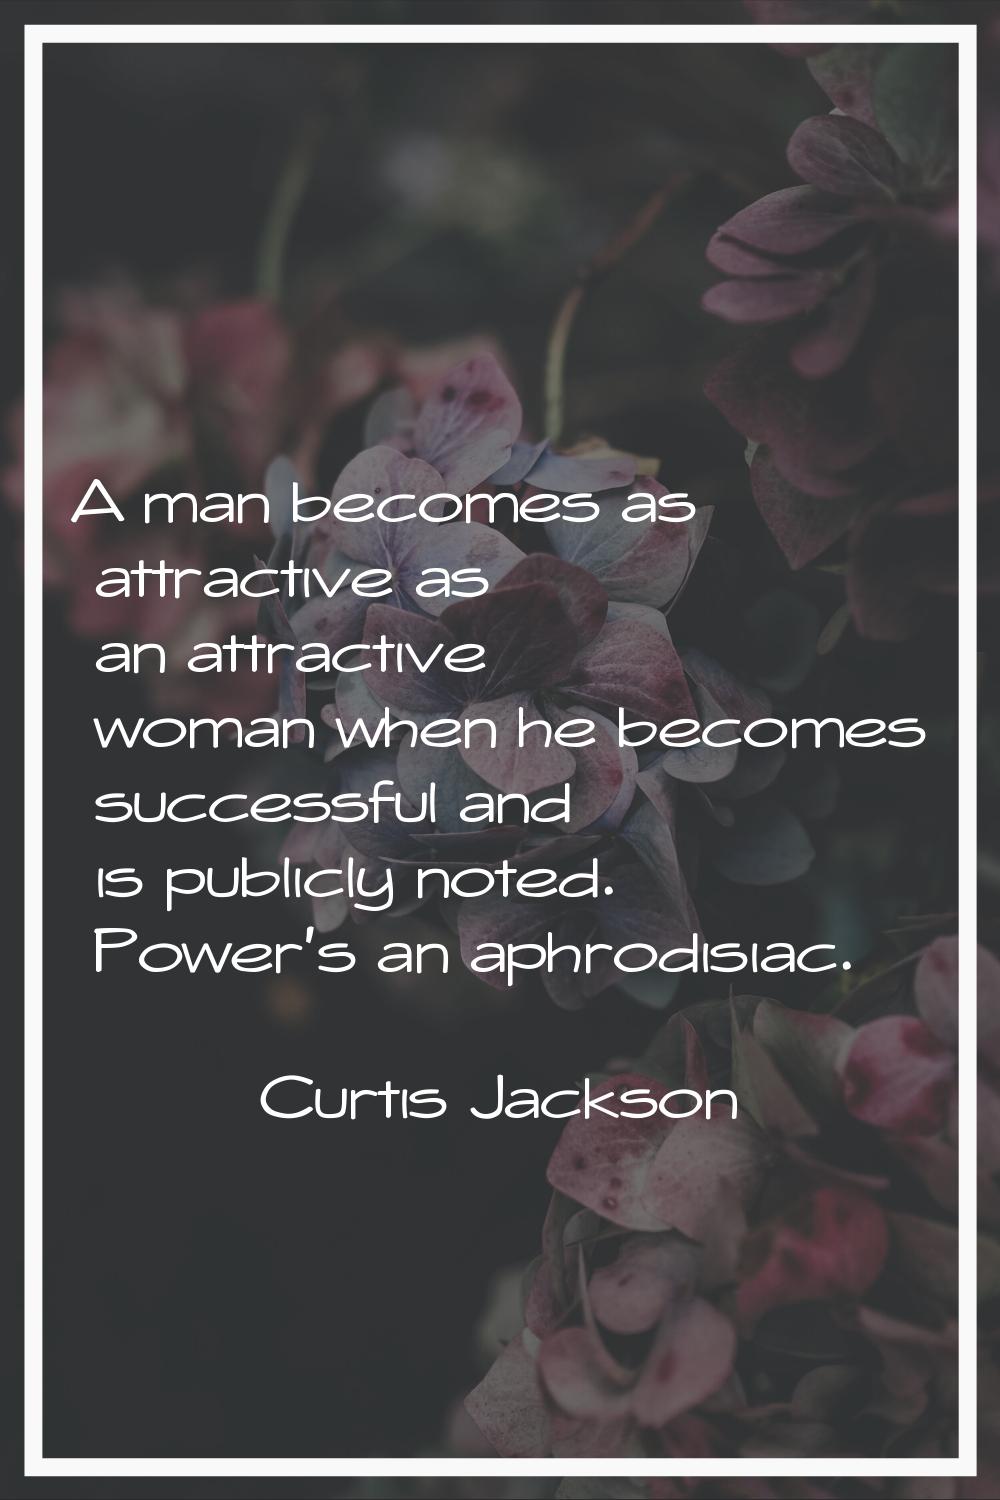 A man becomes as attractive as an attractive woman when he becomes successful and is publicly noted